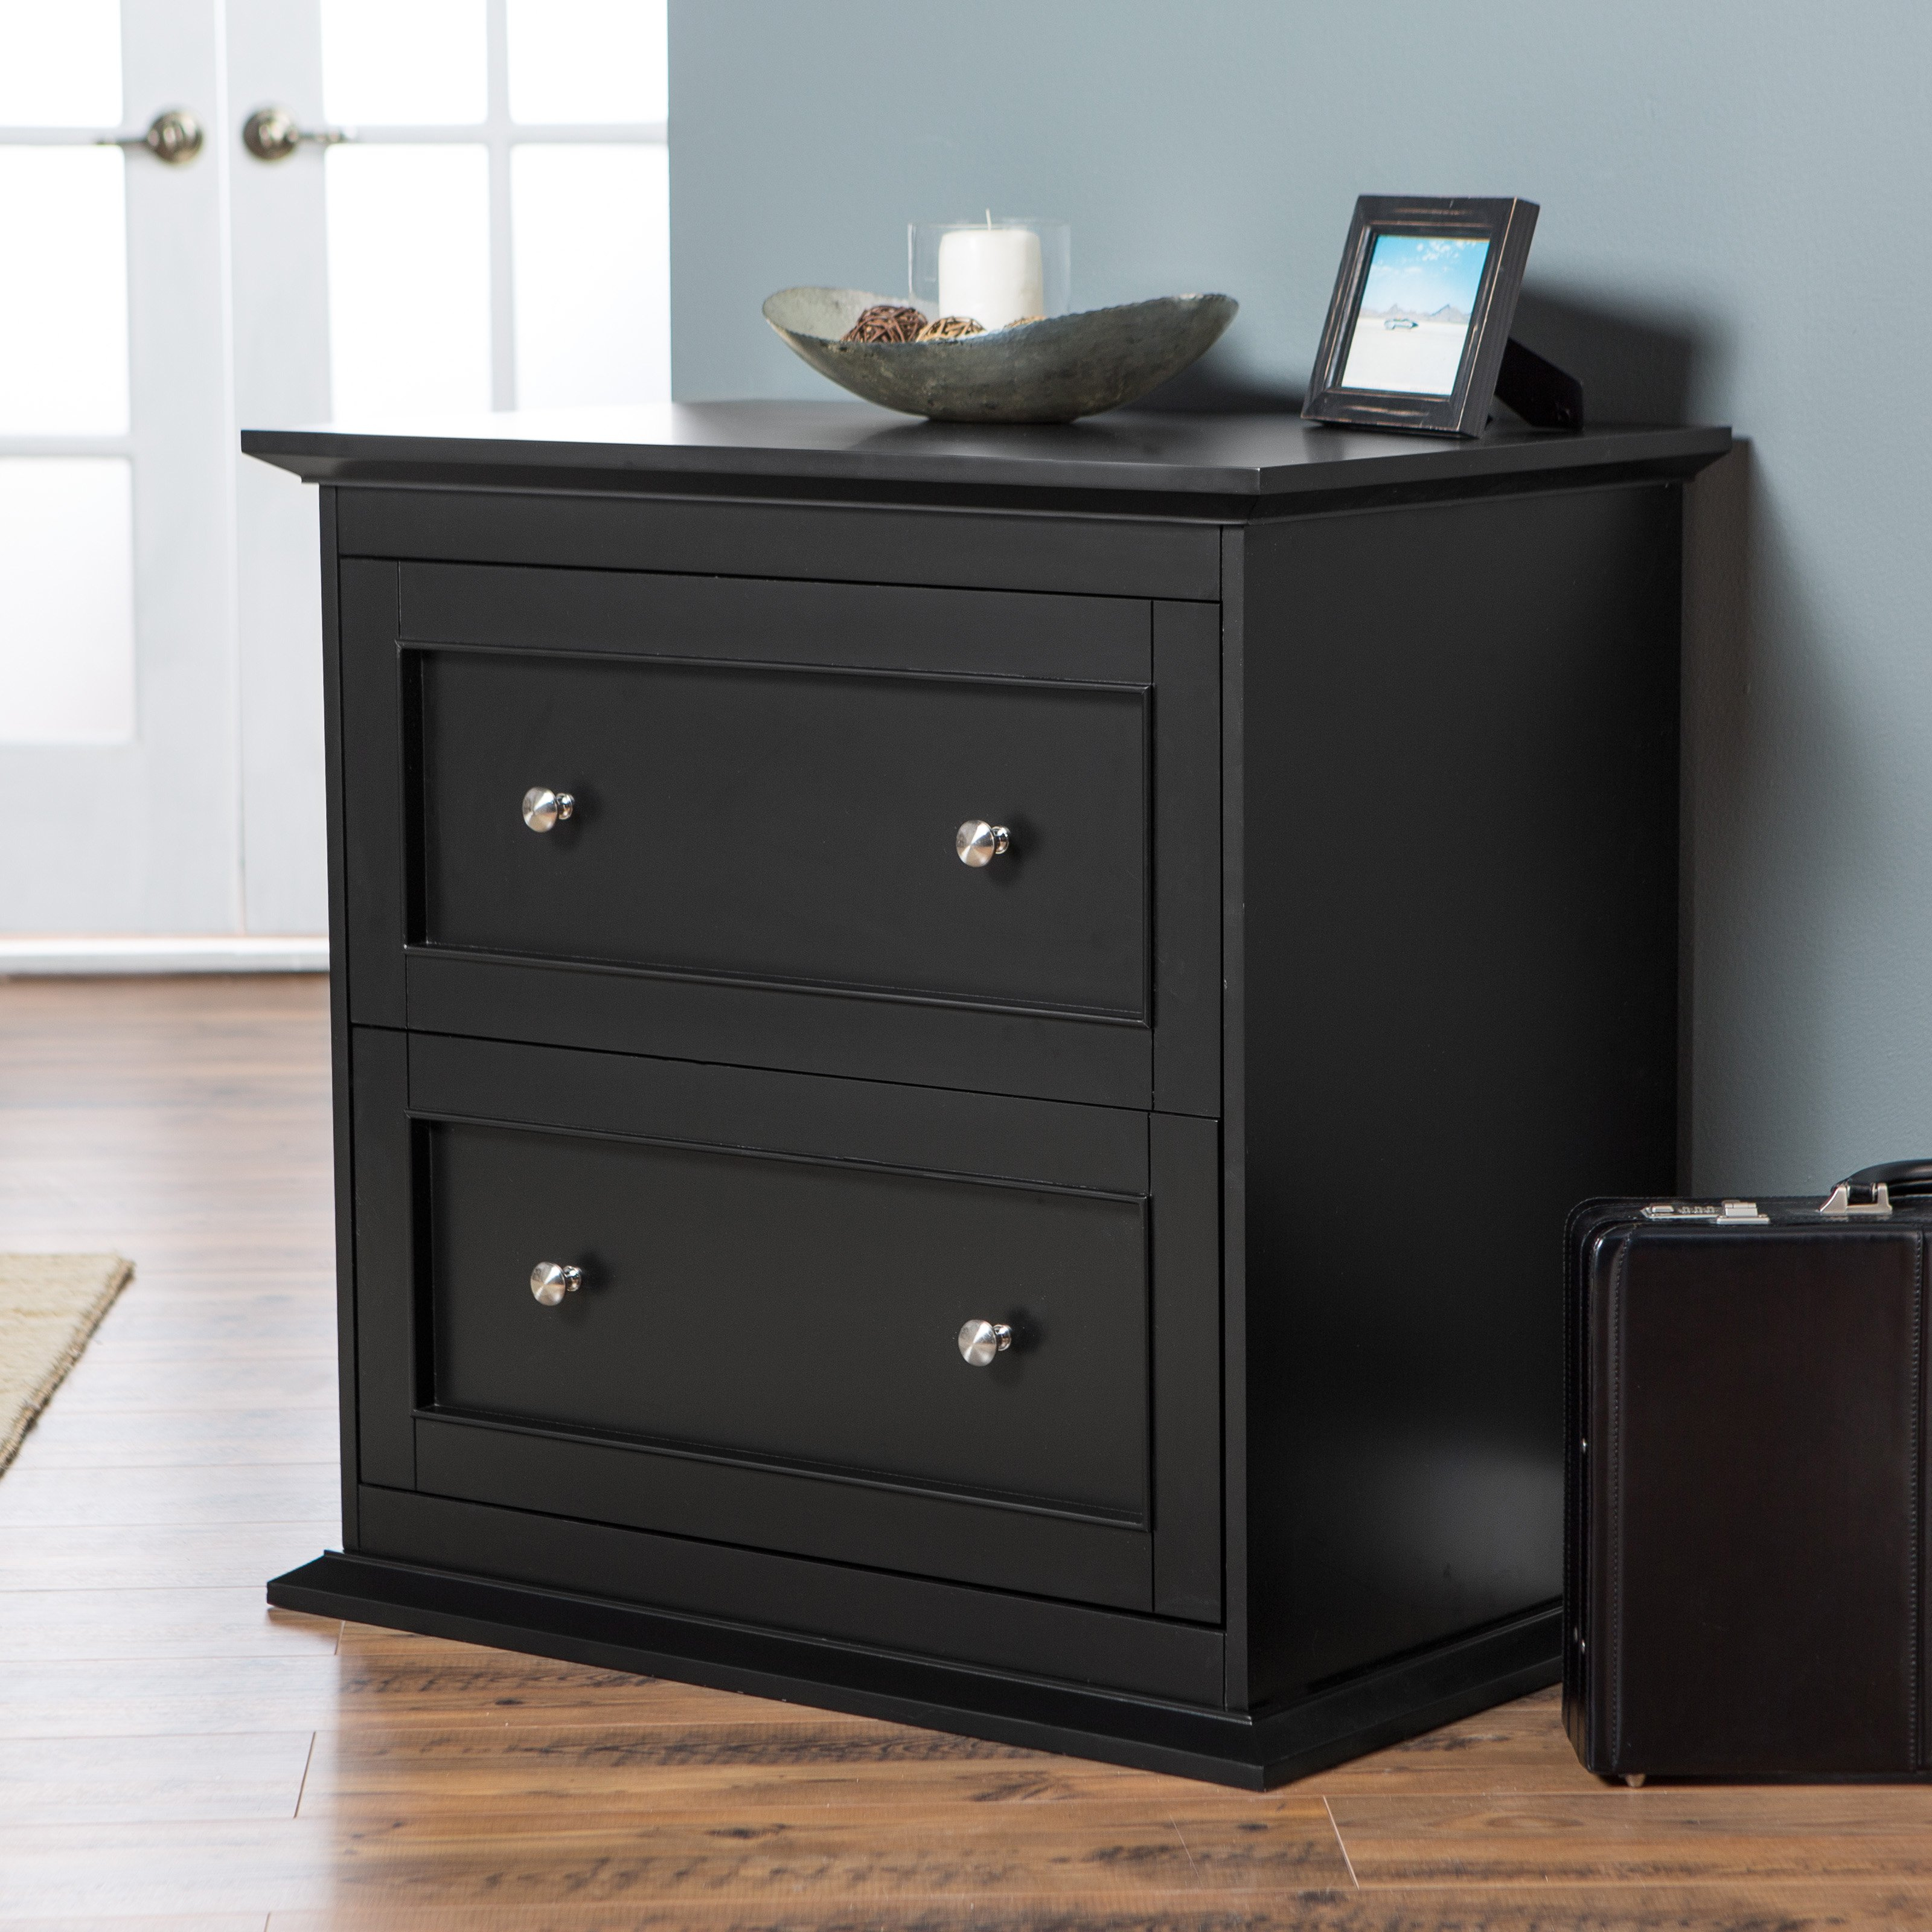  Black  Lateral File Cabinet   Cabinet  Ideas